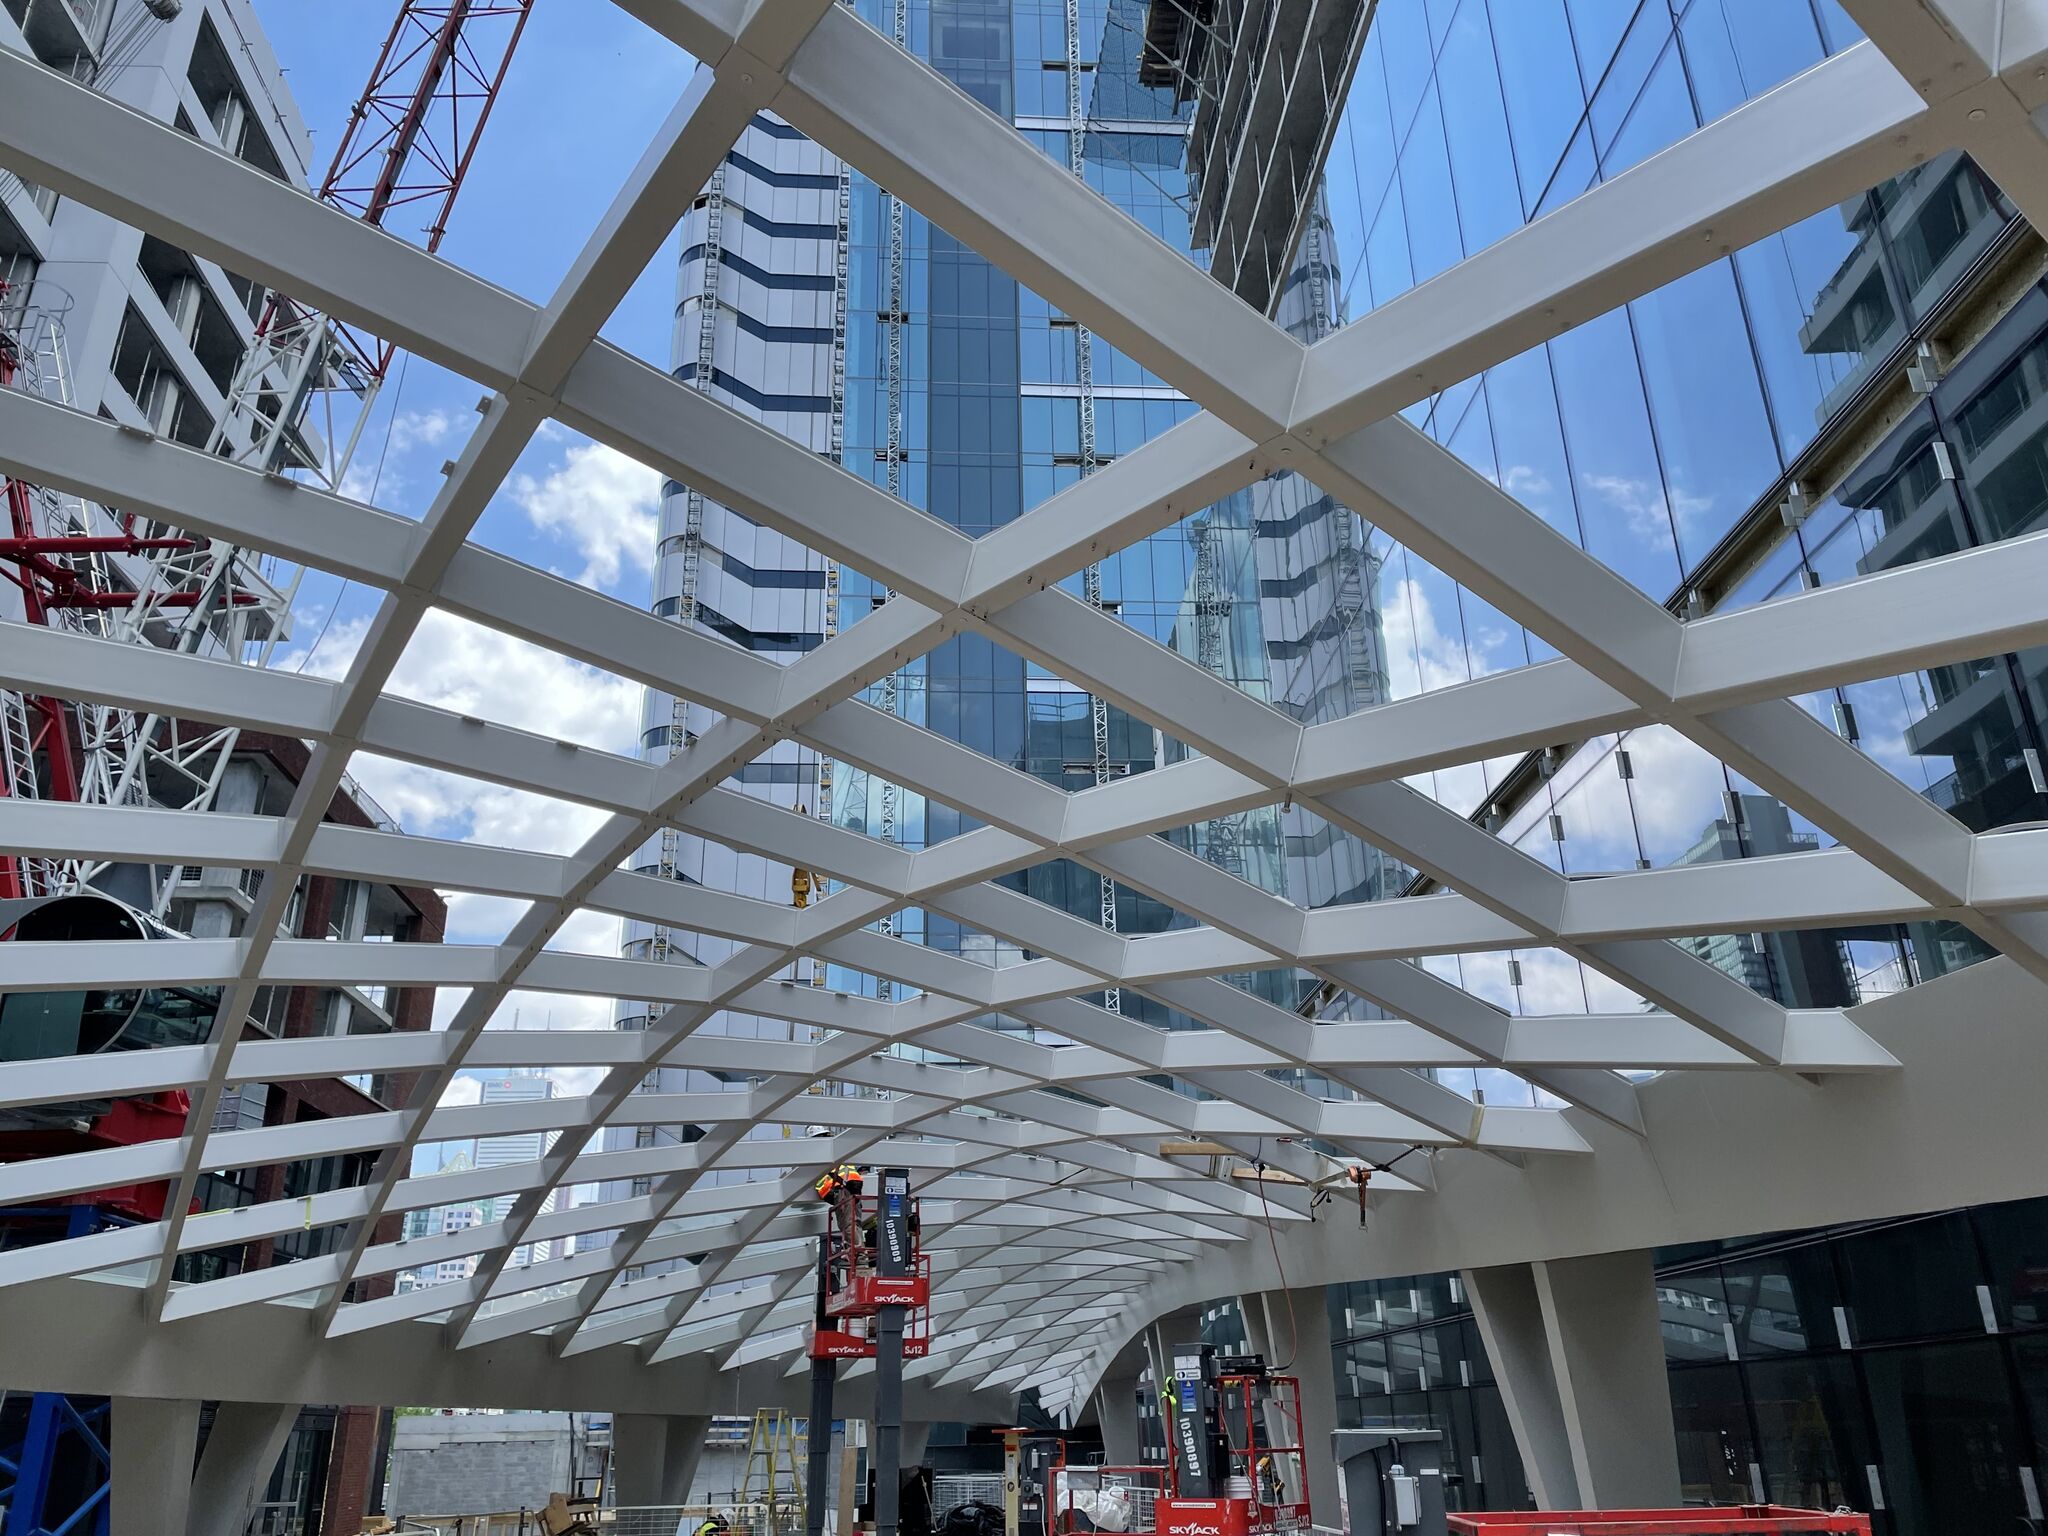 The Well, Tridel, Allied, RioCan, Wallman, architects—Alliance, BDP, Toronto